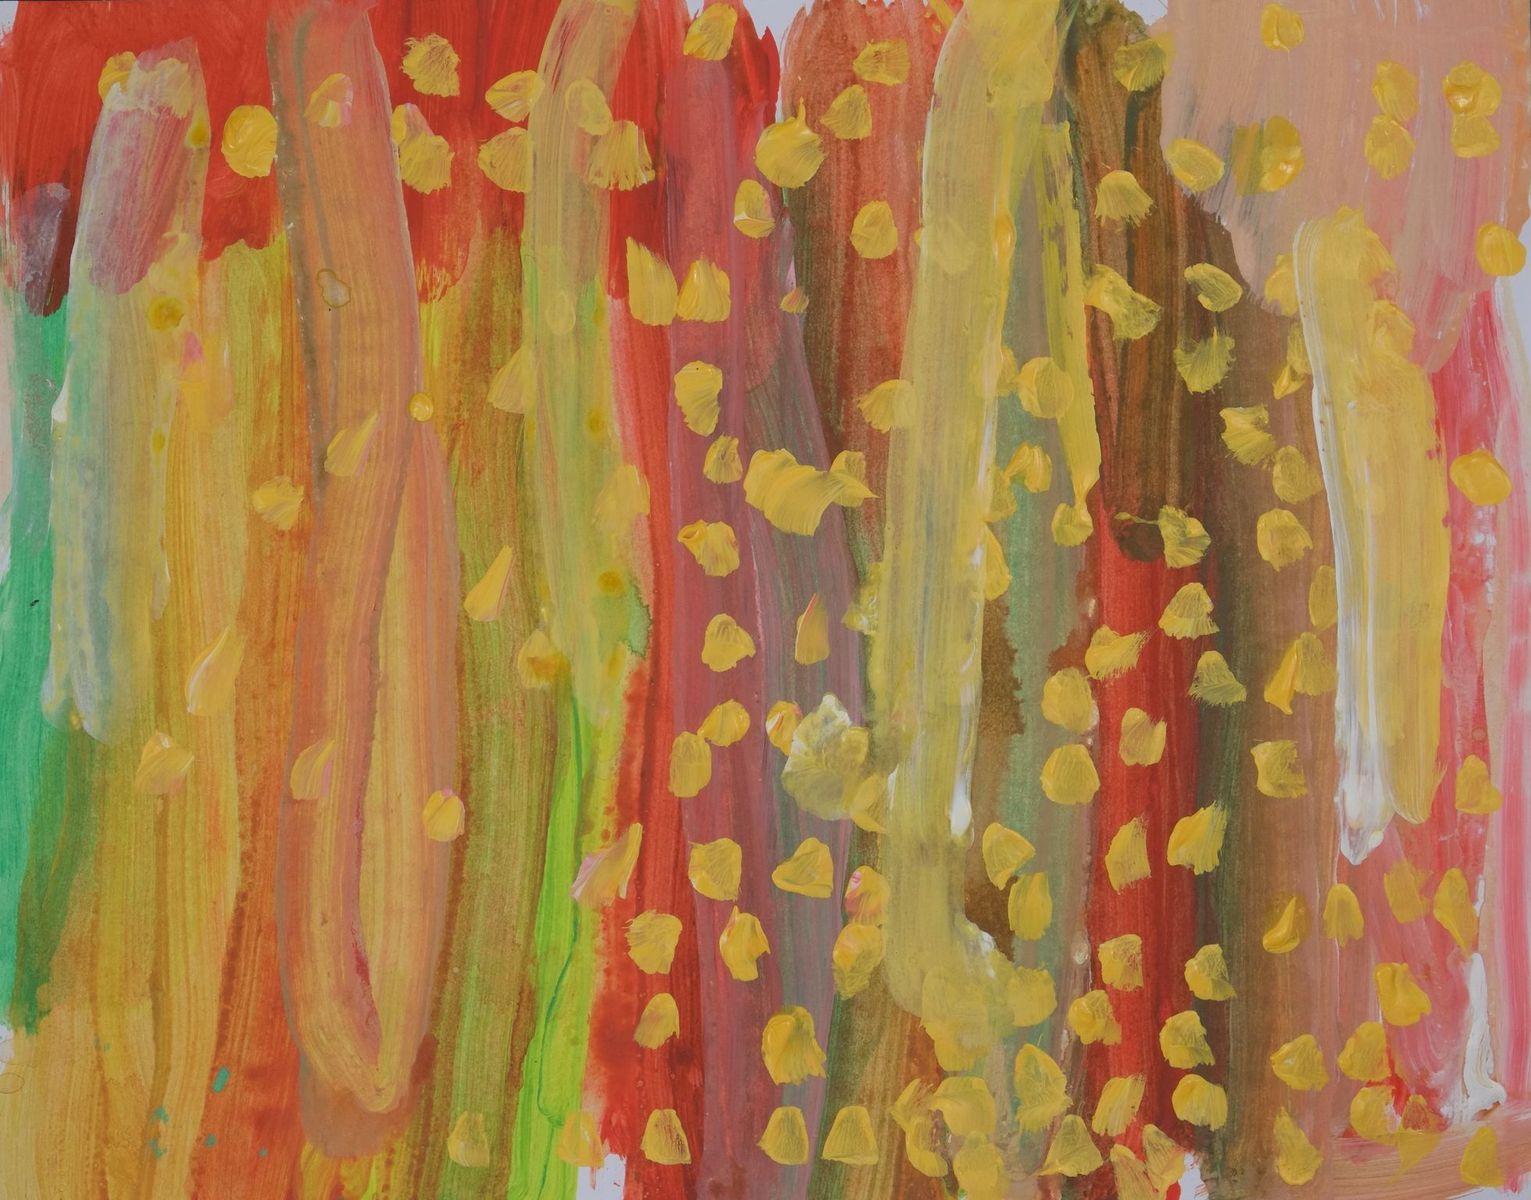 Acrylic on paper artwork with broad vertical brush strokes of green, yellow, red and brown with yellow dots throughout